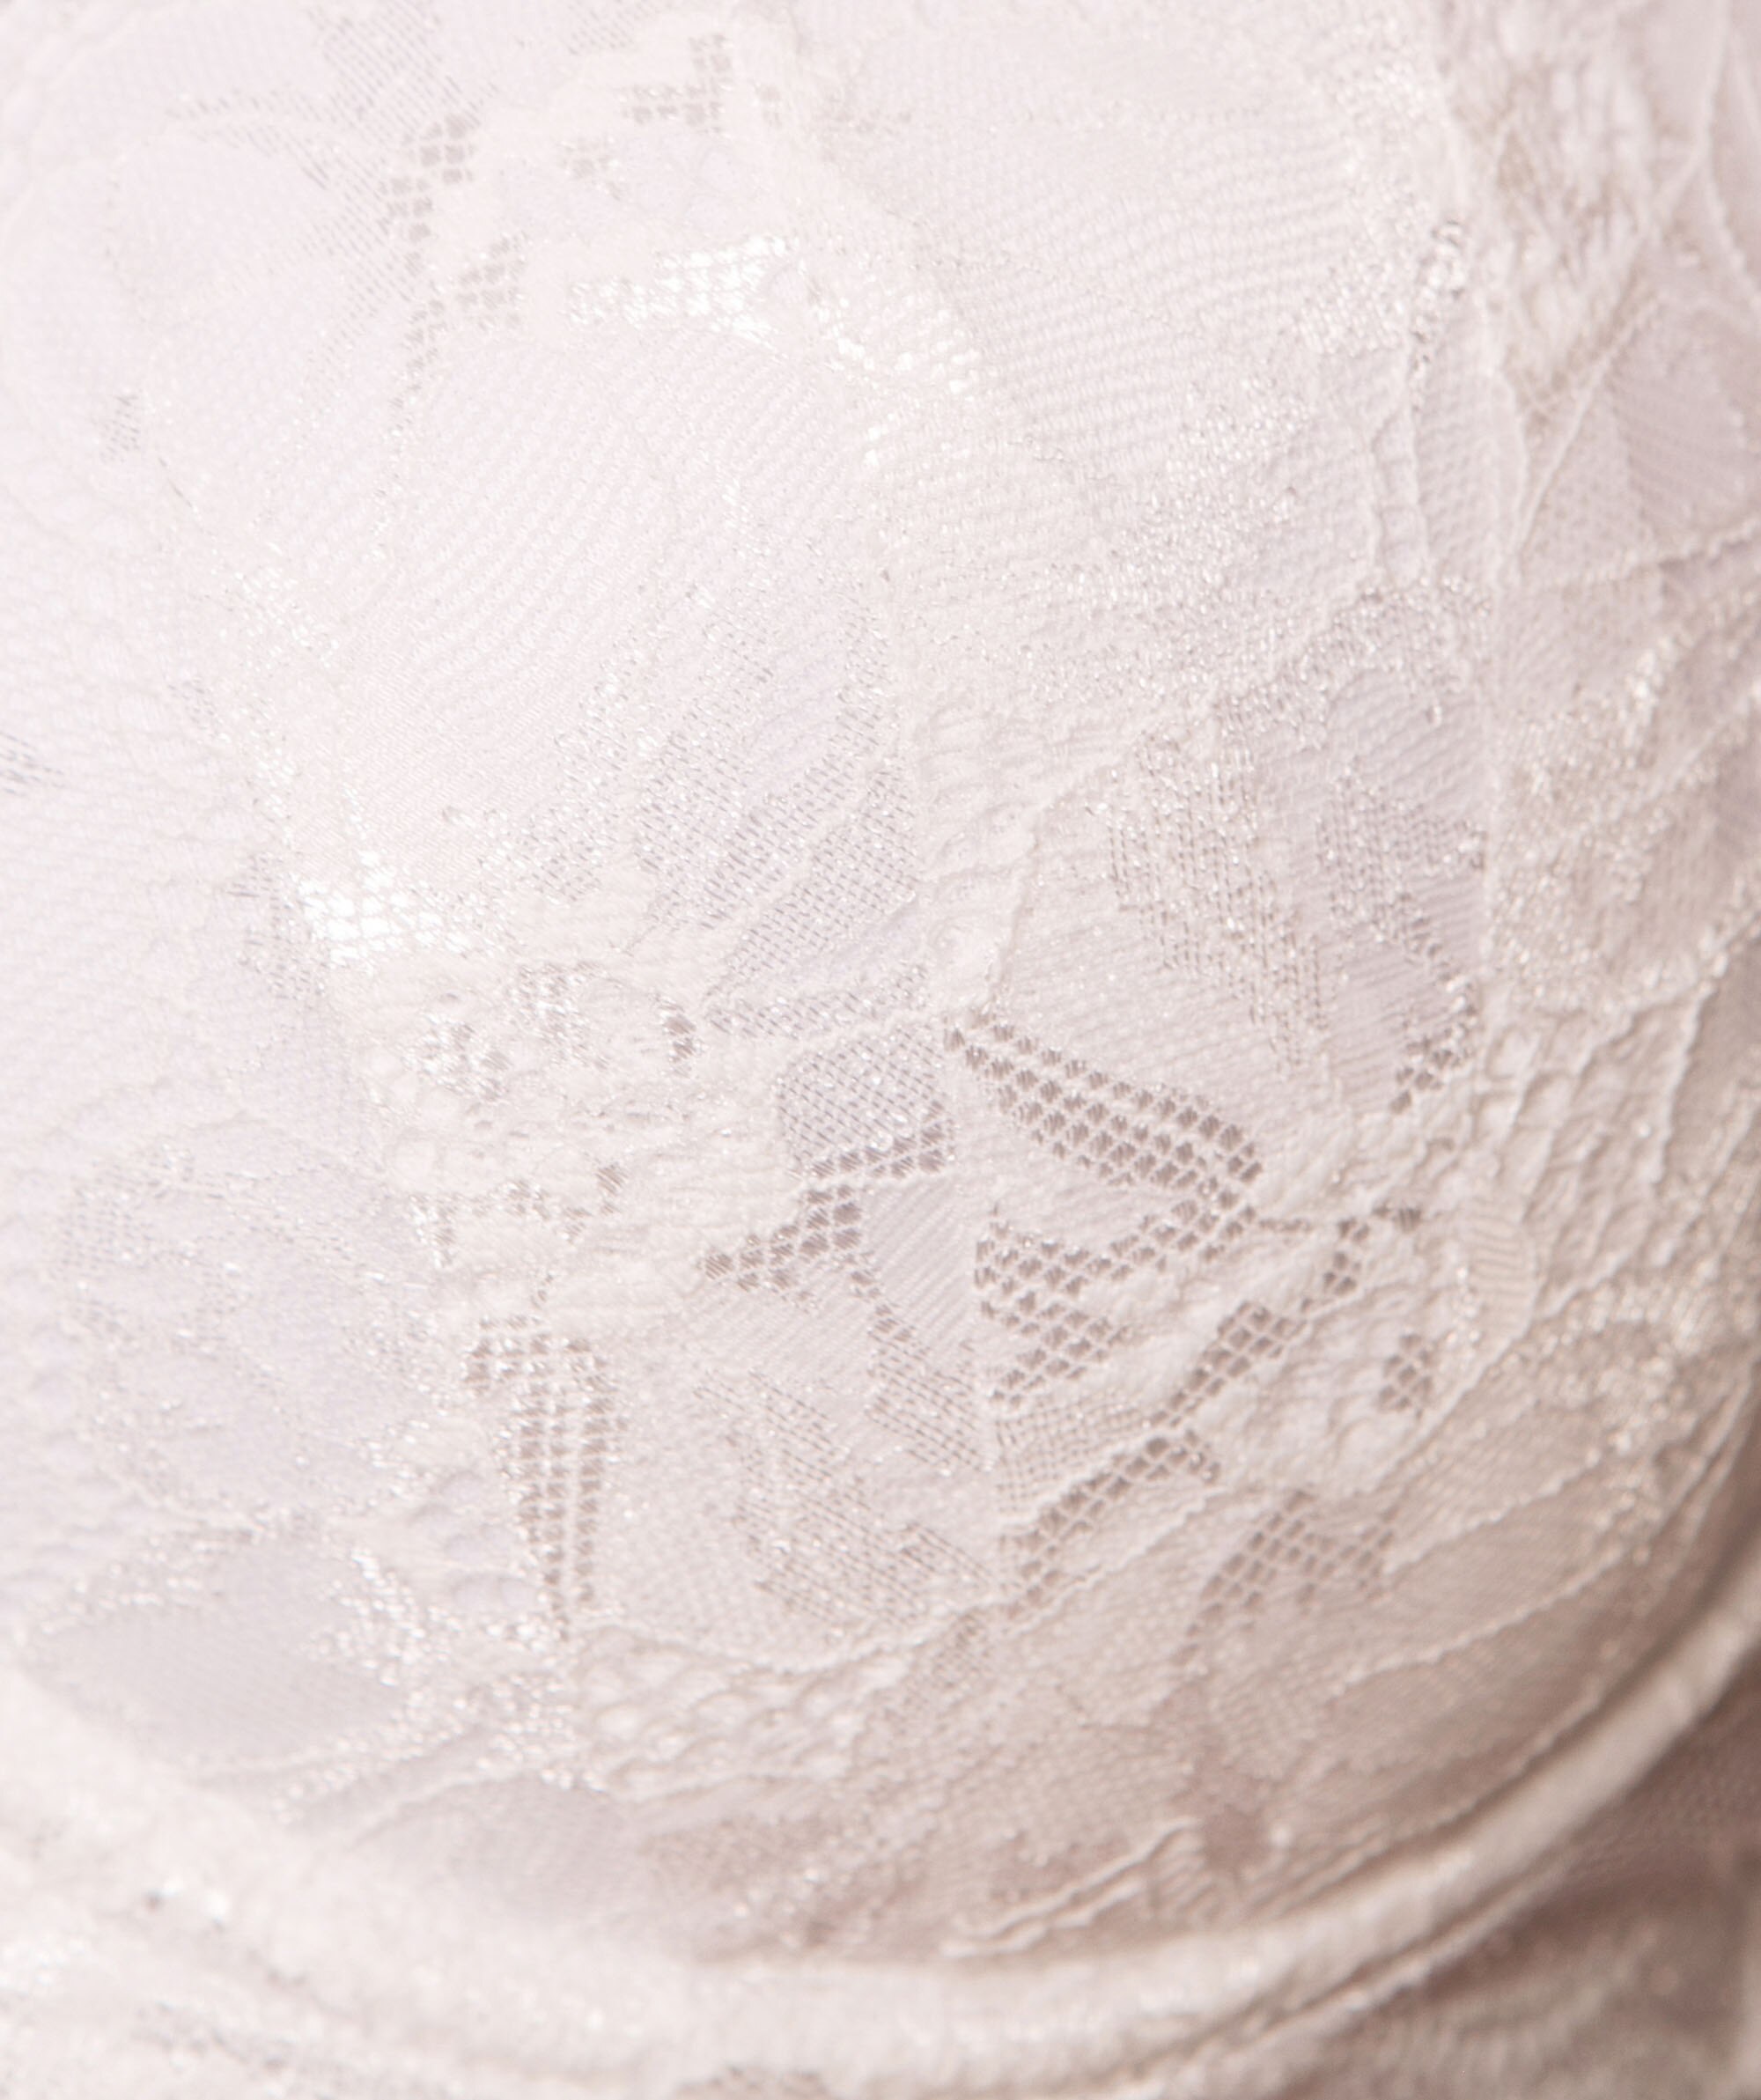 Posie Lace Full Cup Bra - Ivory